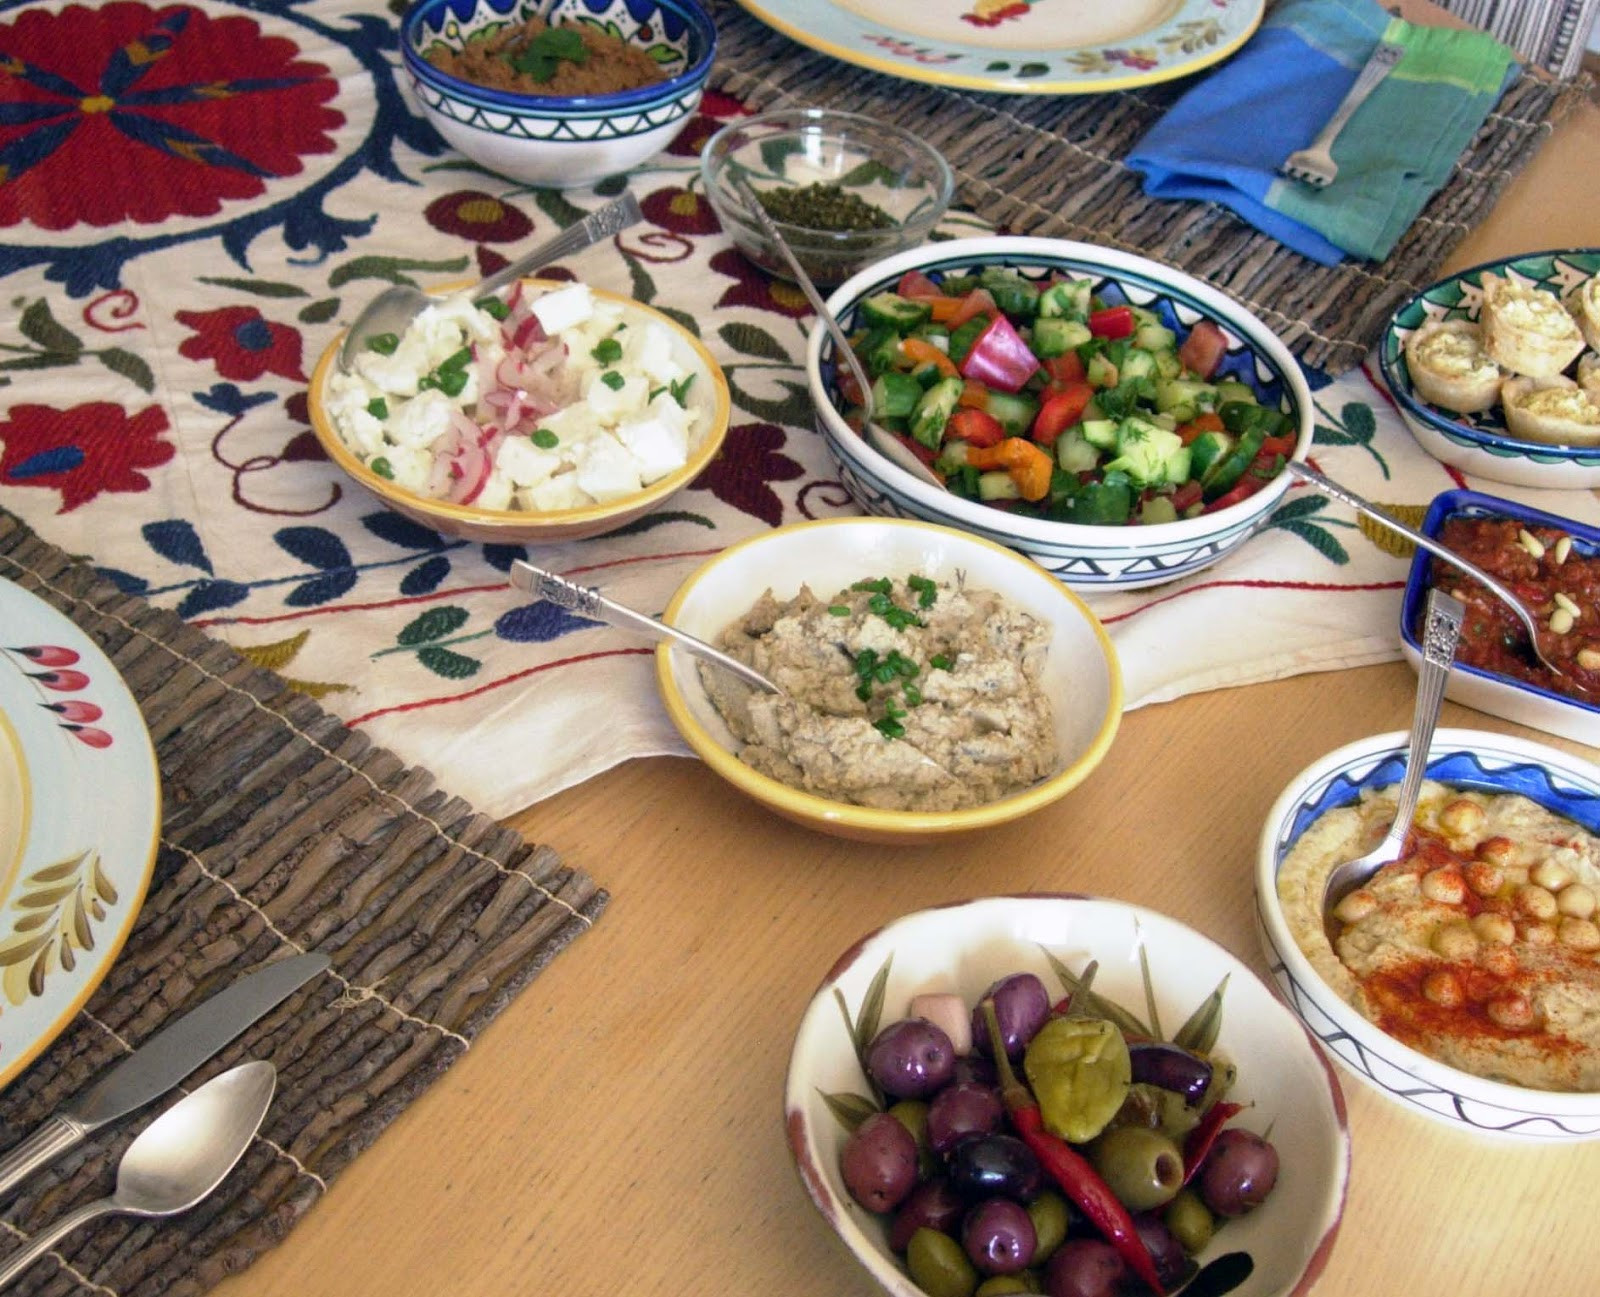 Middle Eastern Food Recipes Appetizers
 This is How I Cook Mezze or Middle Eastern Appetizers